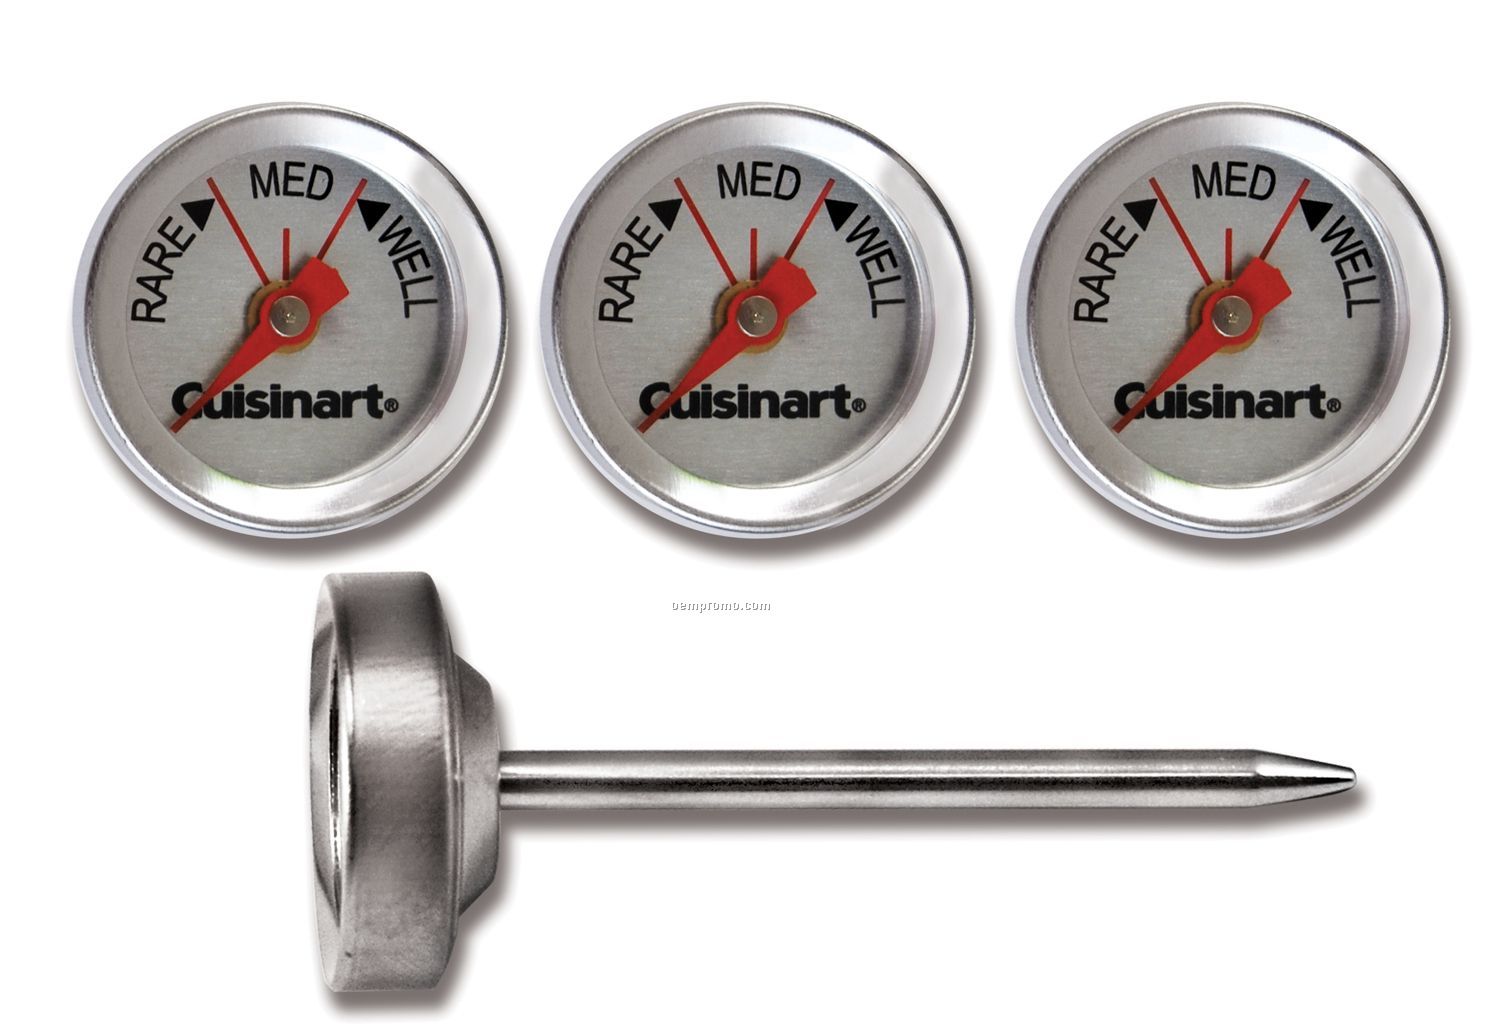 Cuisinart Set Of Four Outdoor Grilling Steak Thermometers